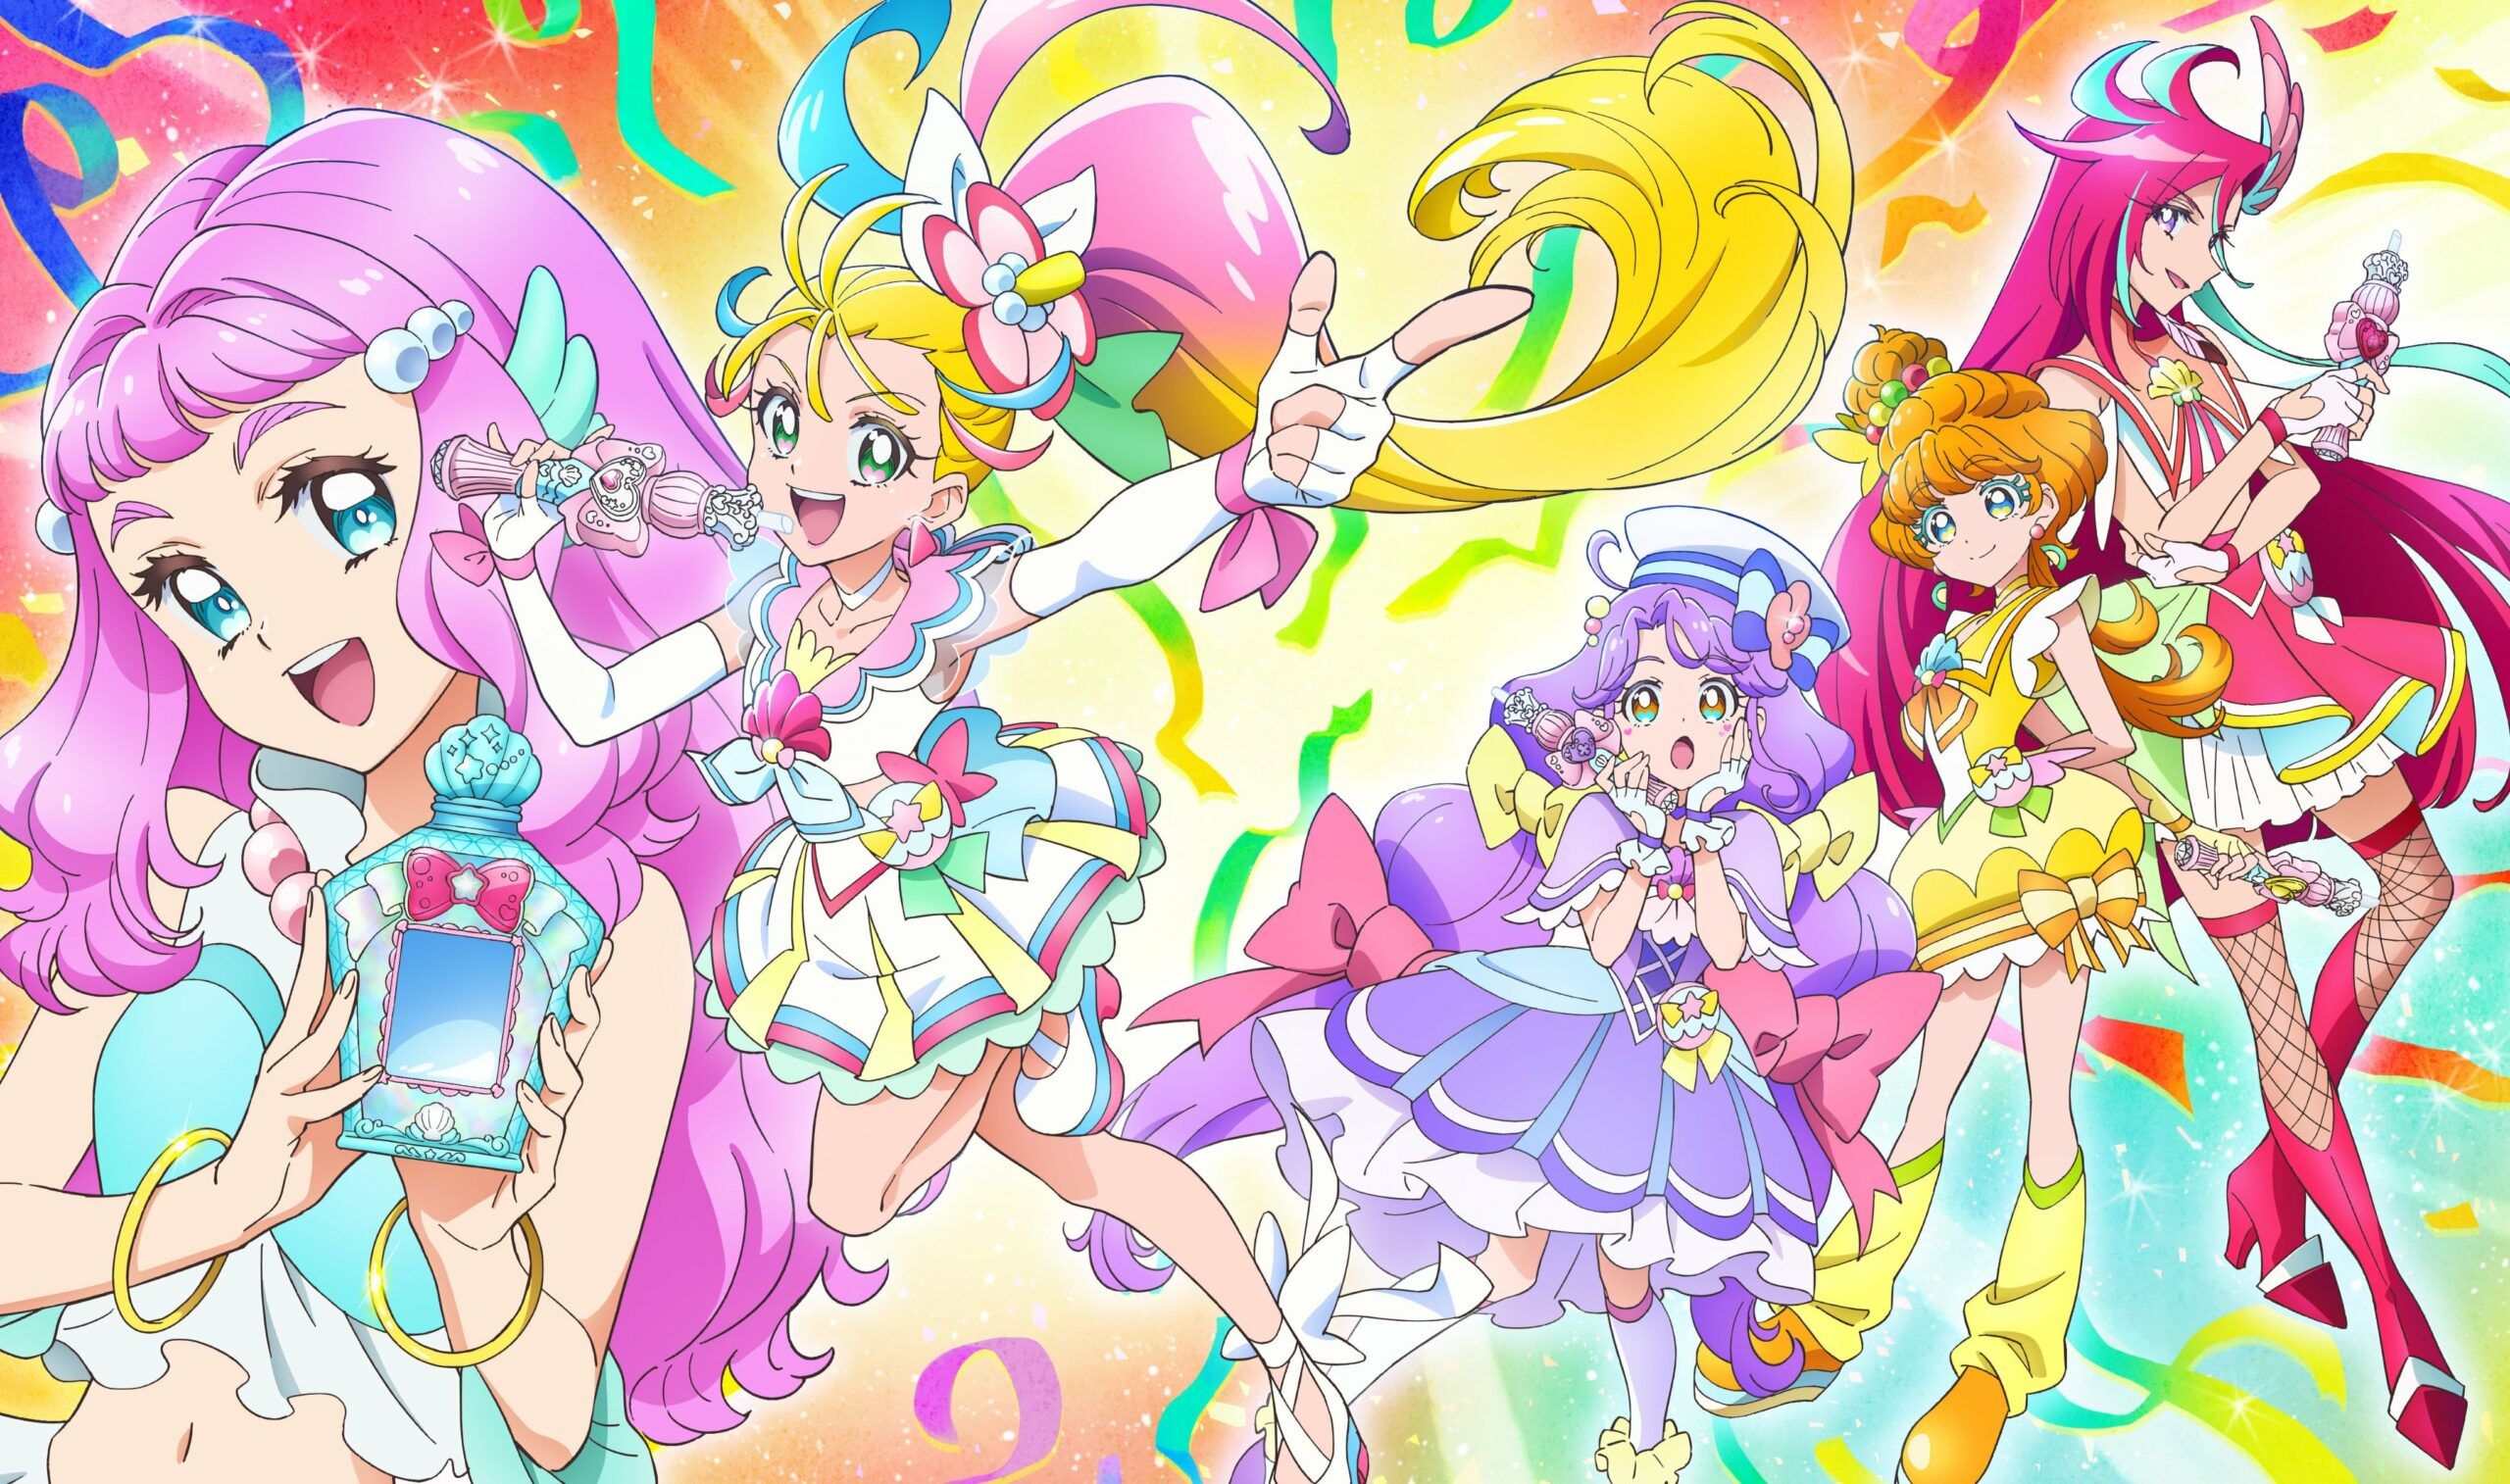 Delicious Party Precure Trademark Filed for 2022 Anime